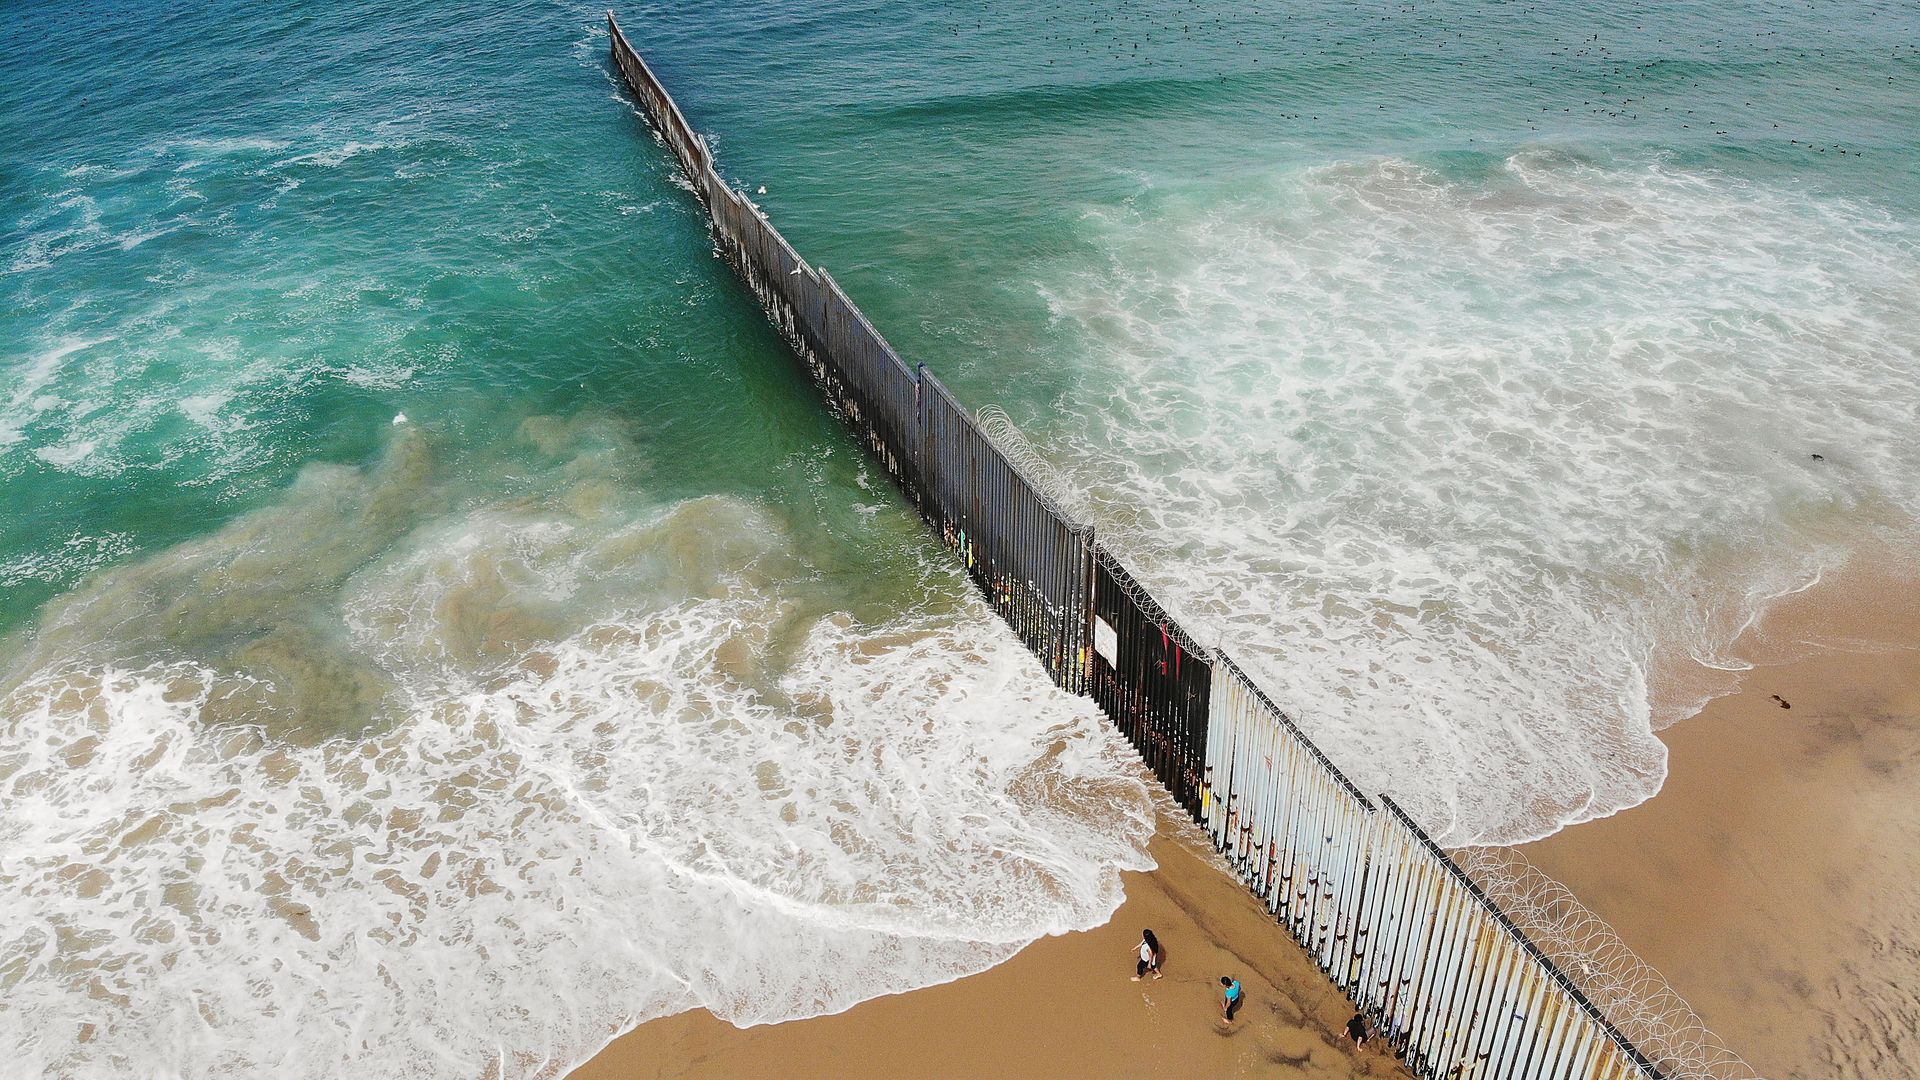 In this image, three people from Mexico walk along a tall fence the southern border that leads down the beach and into the ocean.